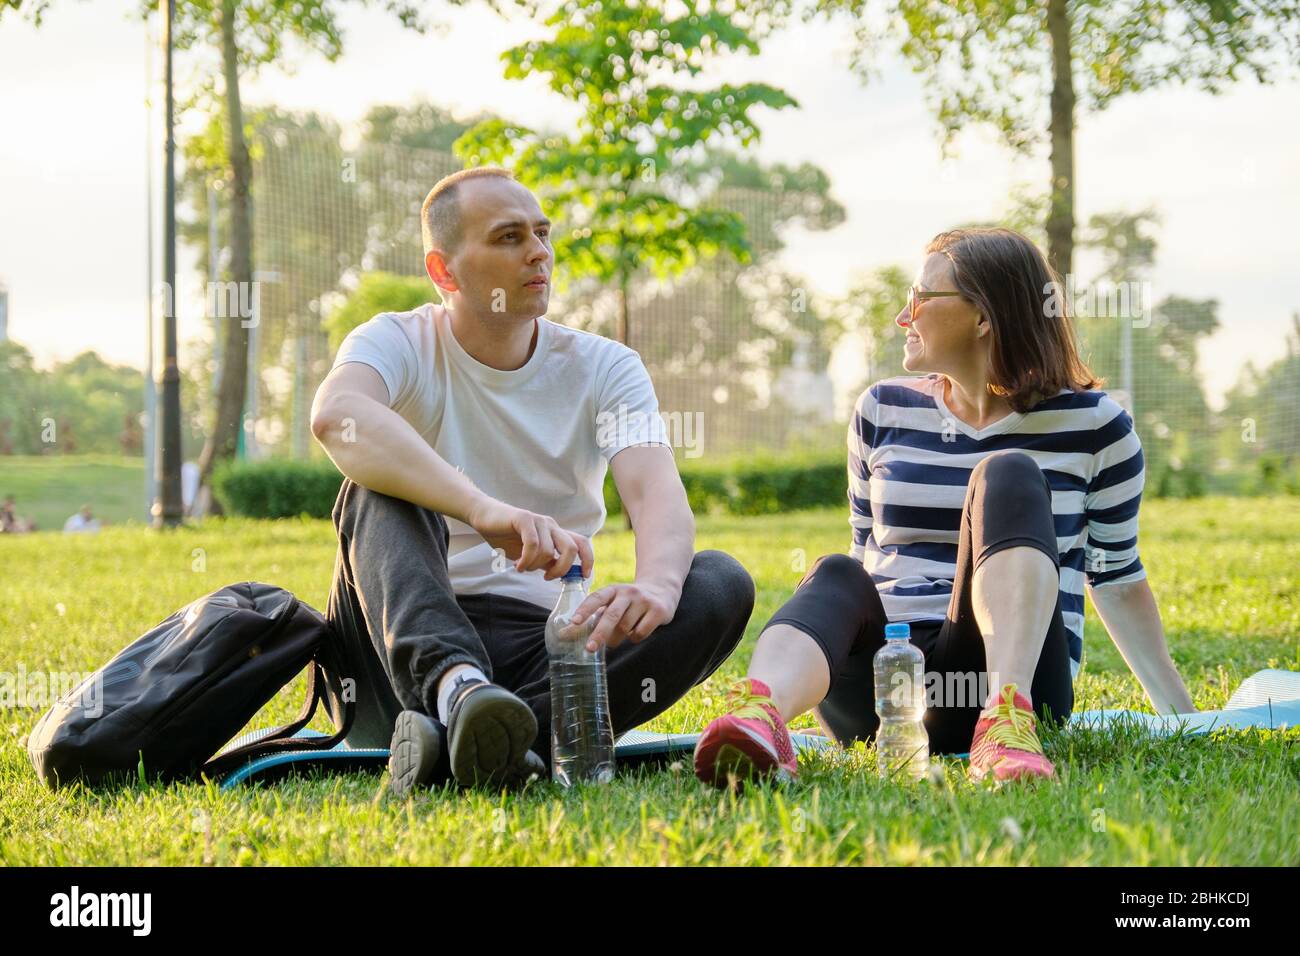 Middle-aged couple sitting on yoga mat, man and woman talking relaxing drinking water. Active healthy lifestyle, relationship, sport, fitness in matur Stock Photo